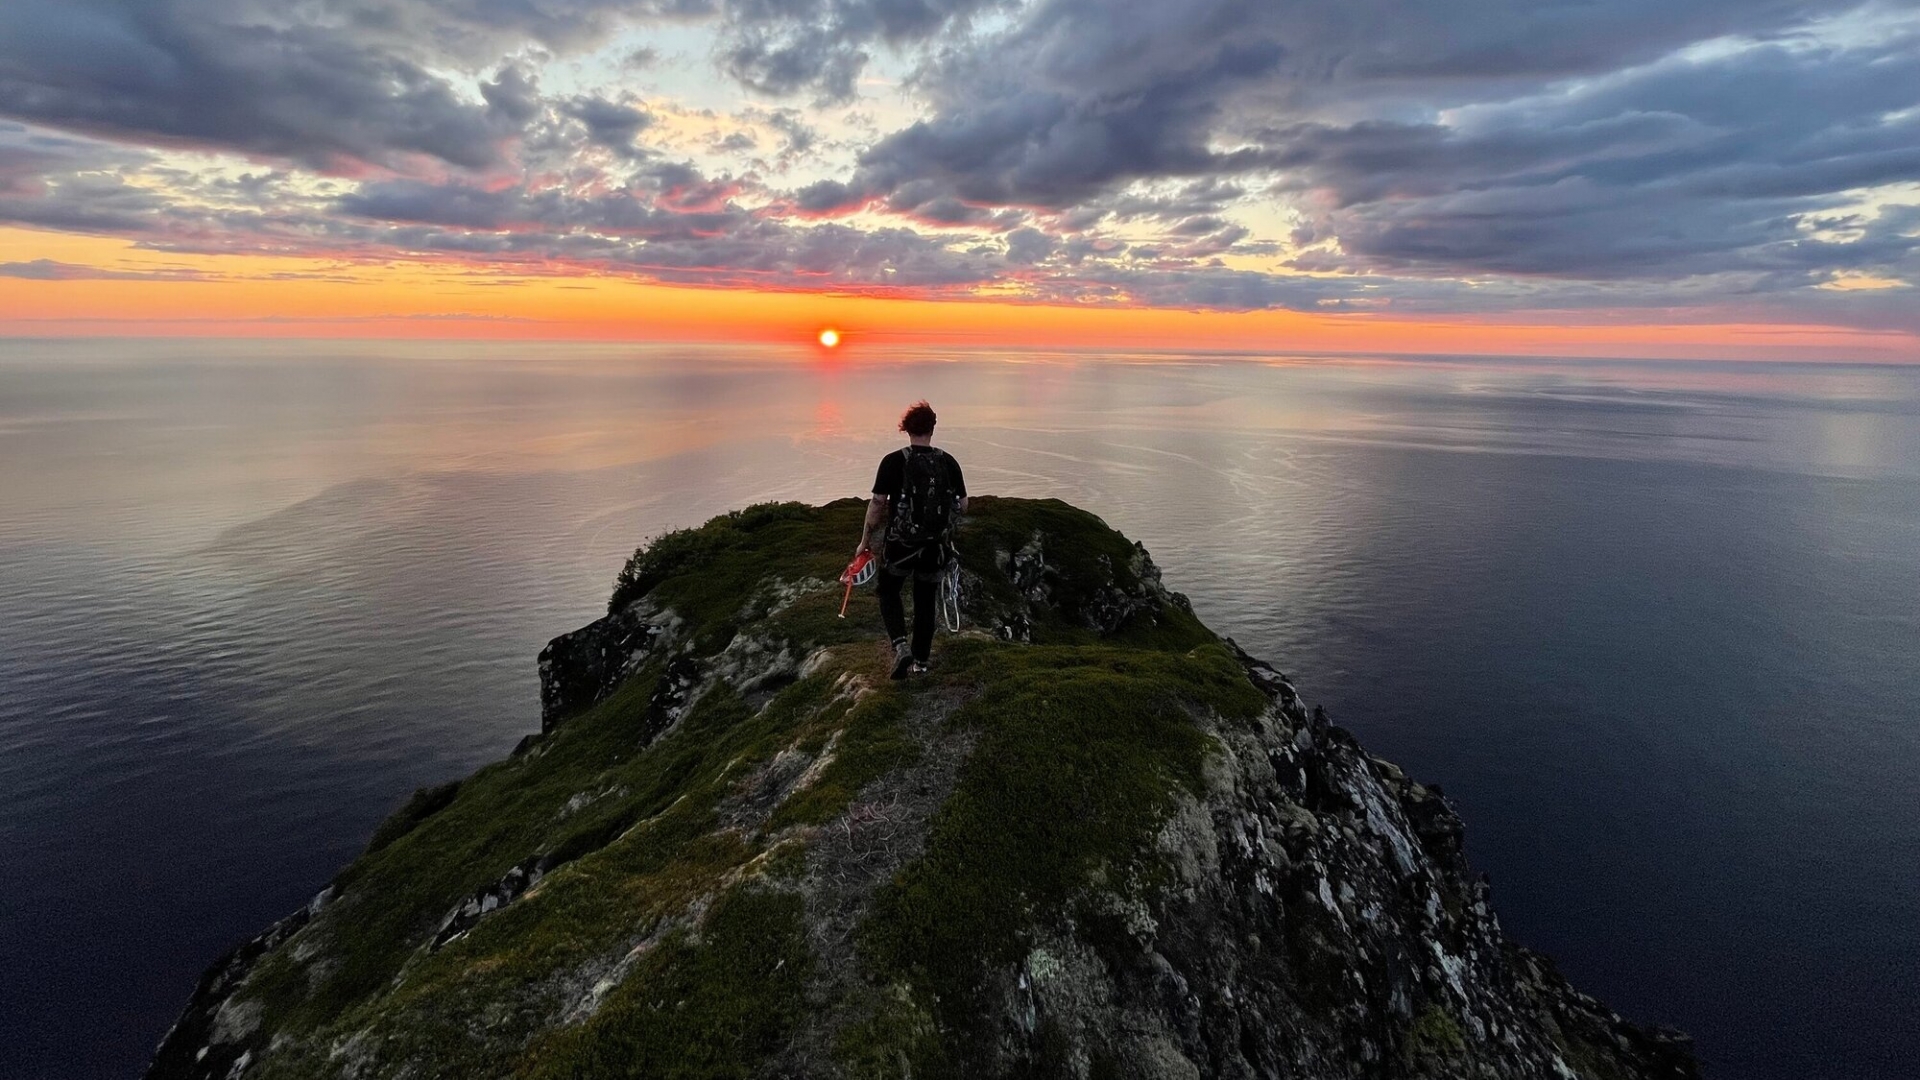 Climber viewing the sunset from a mountain